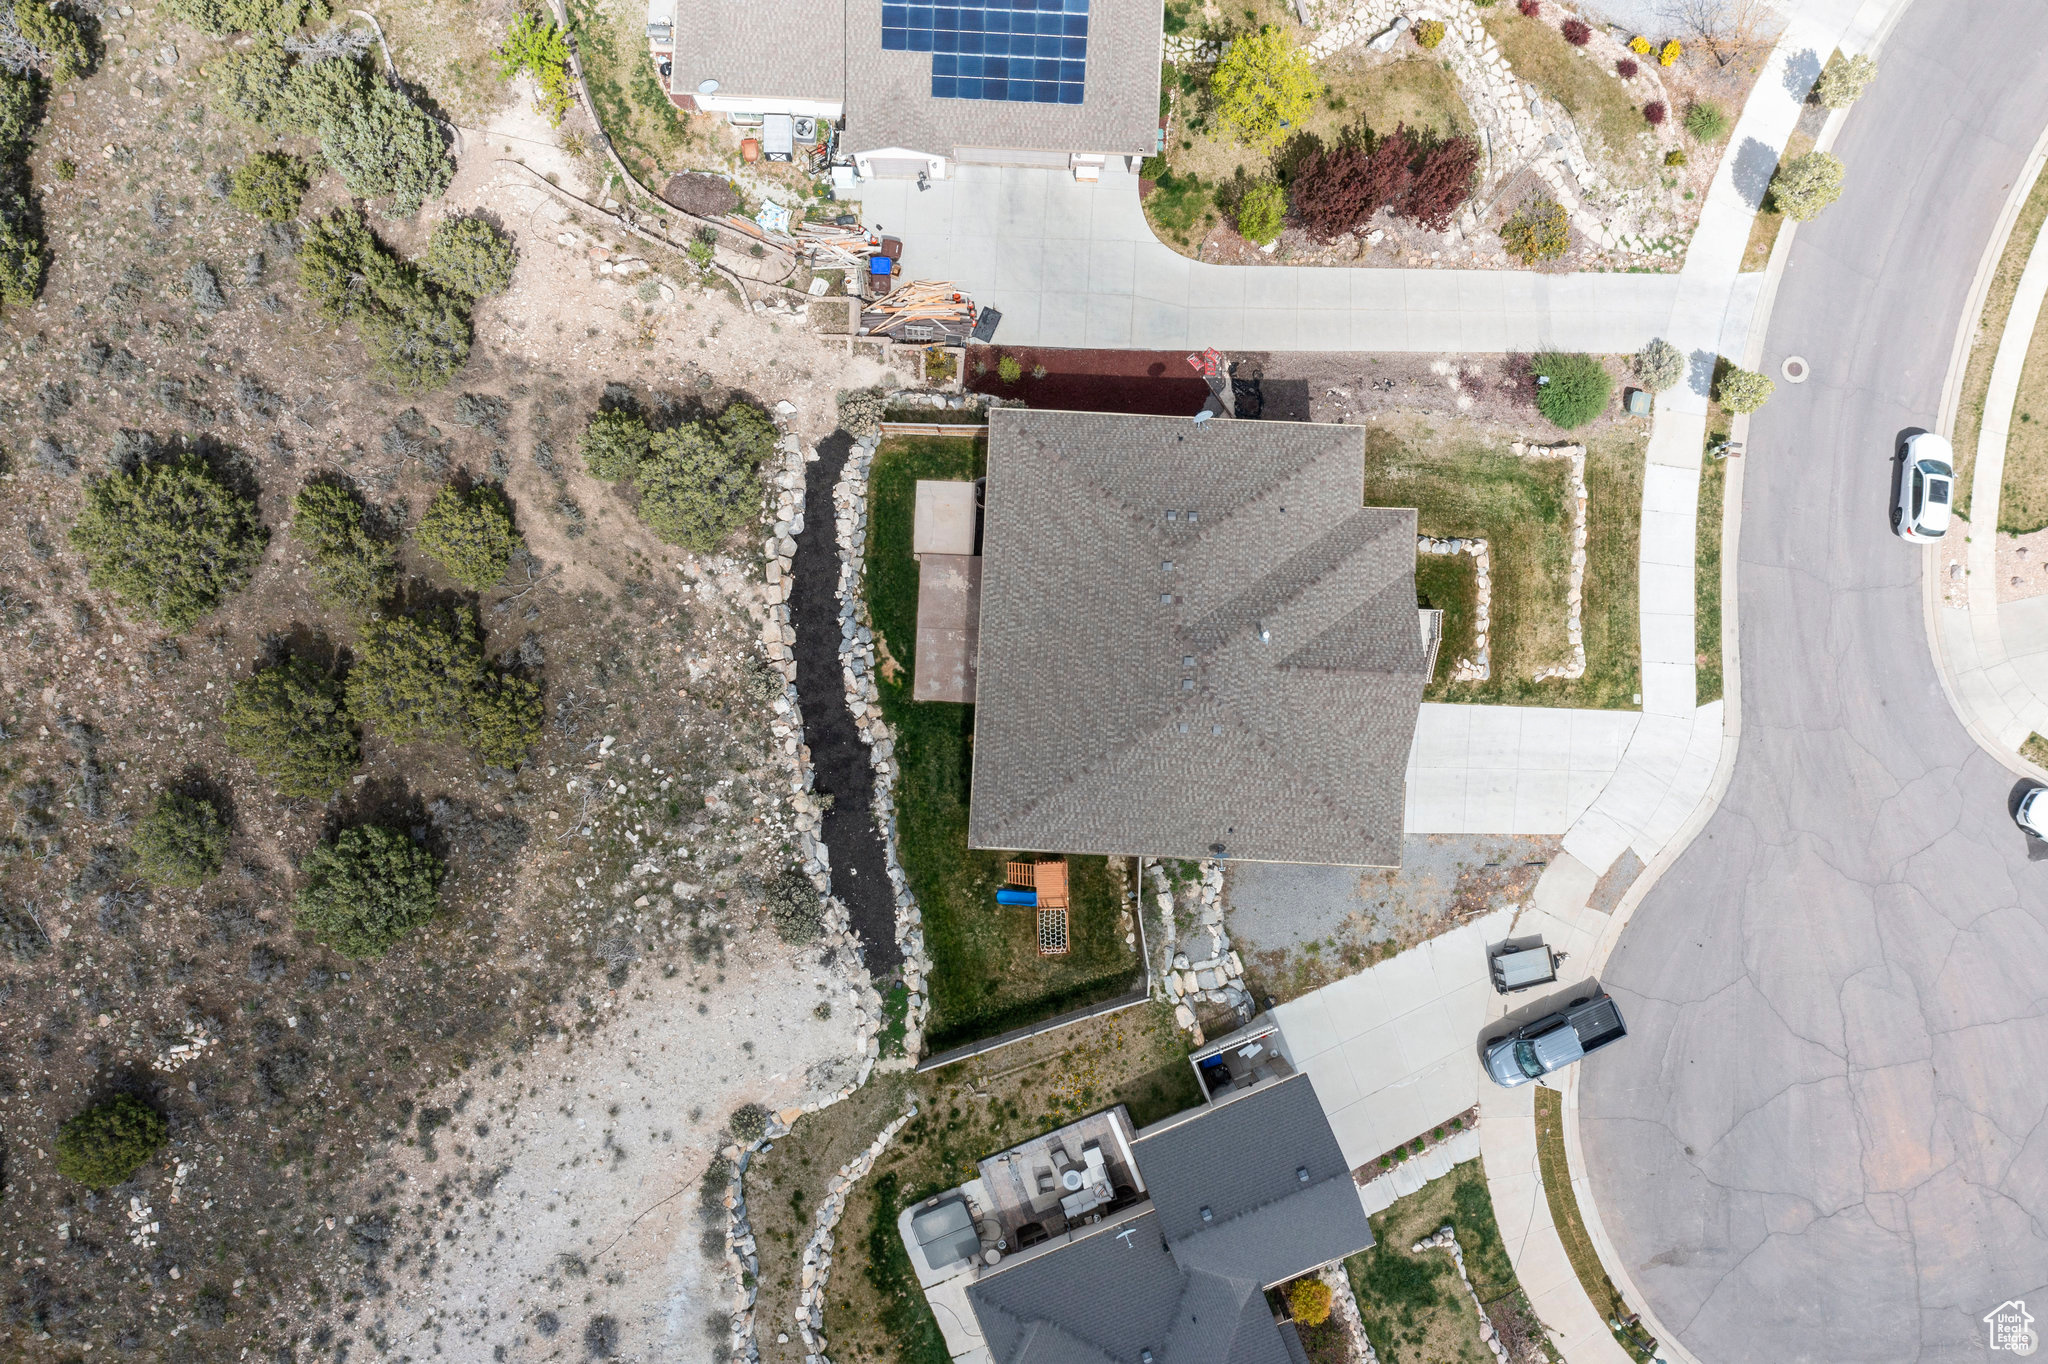 Overhead view of home